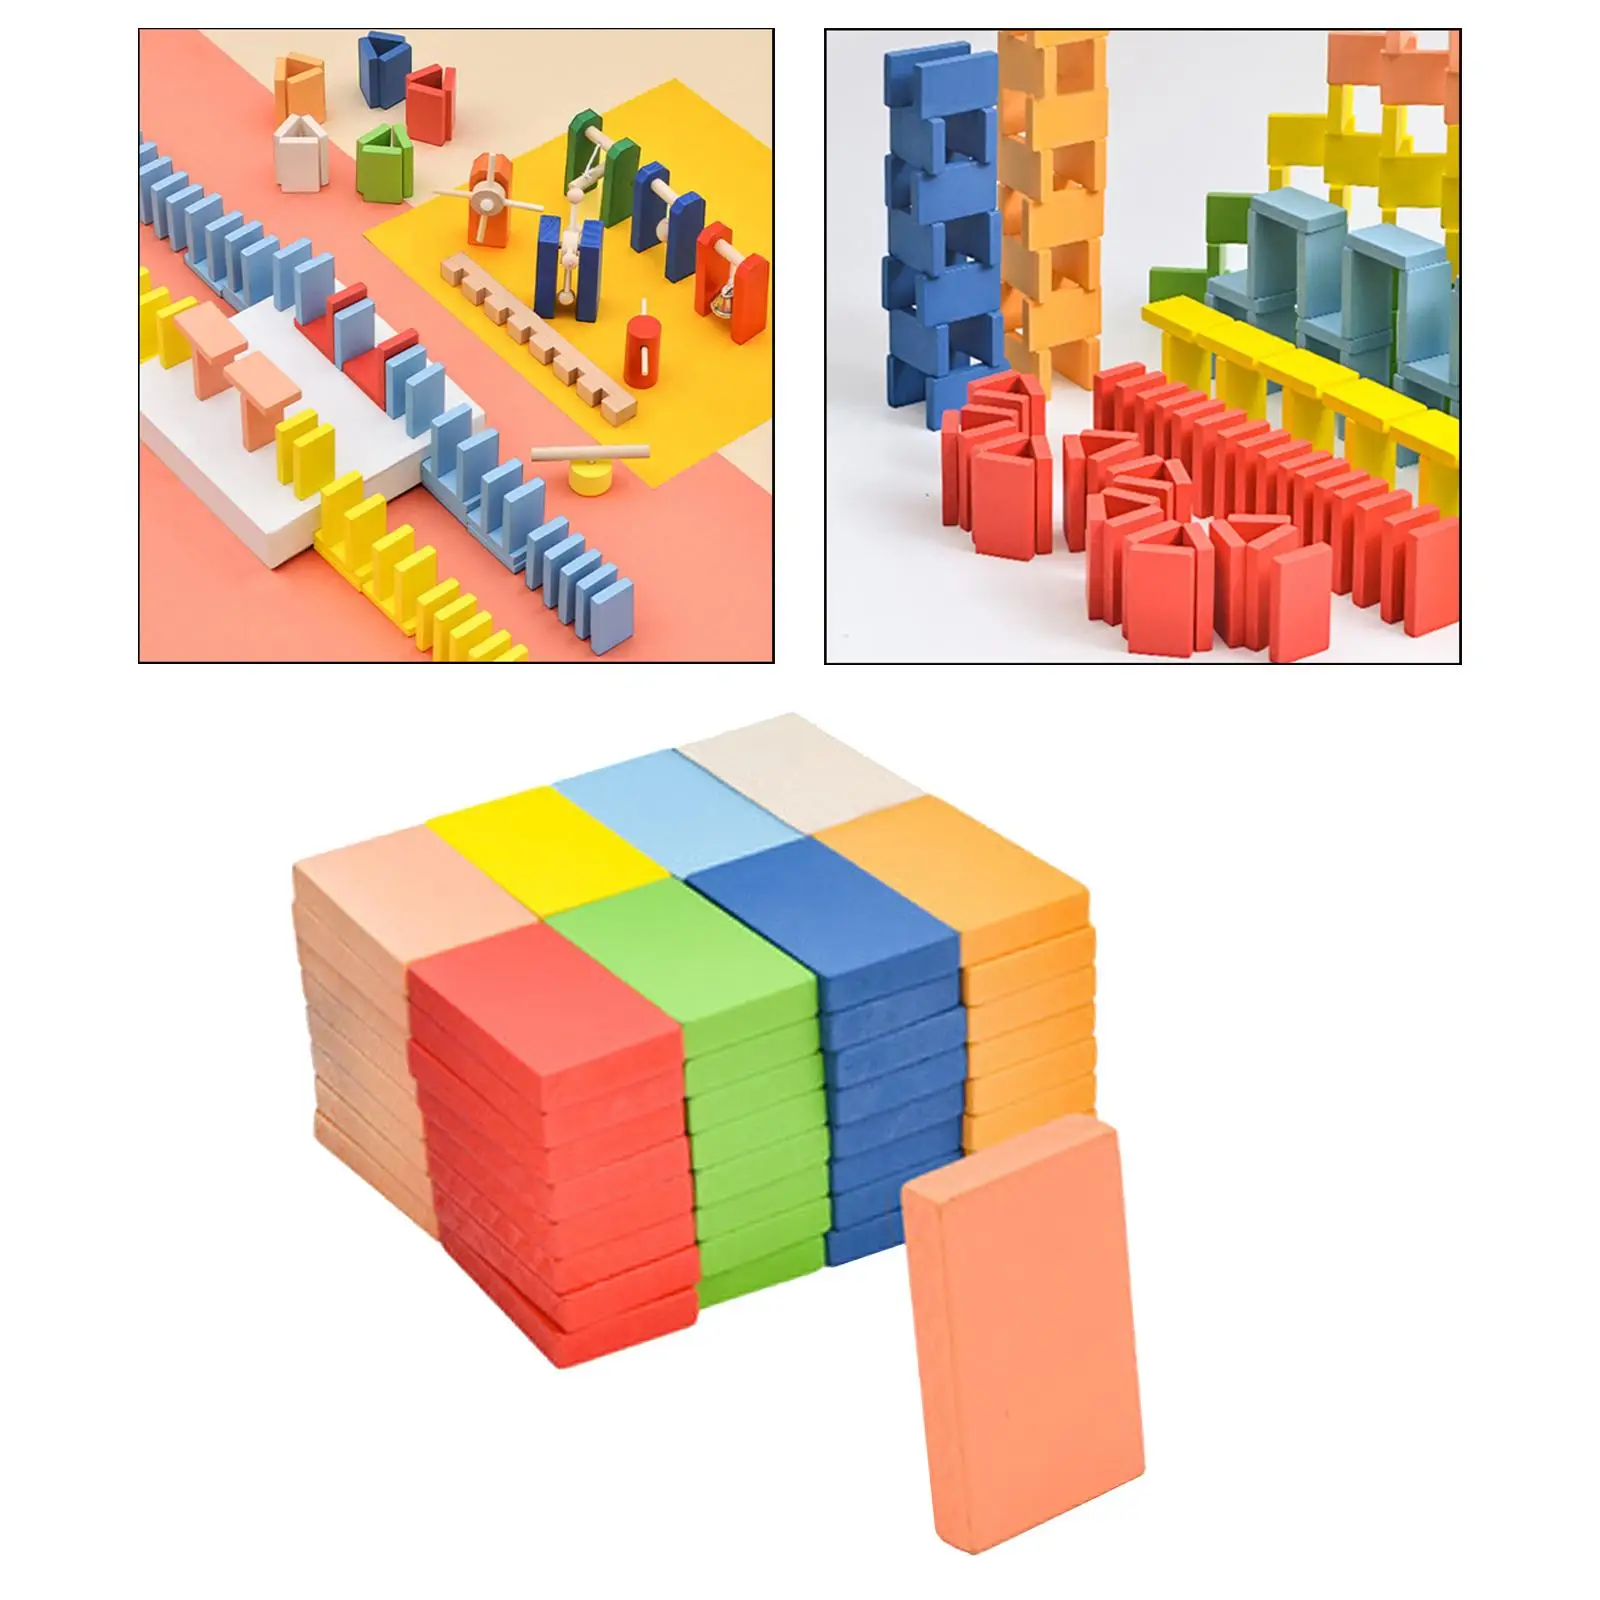 80x Colorful Wooden Building Blocks Kid Educational Toys Gift for Boys Girls